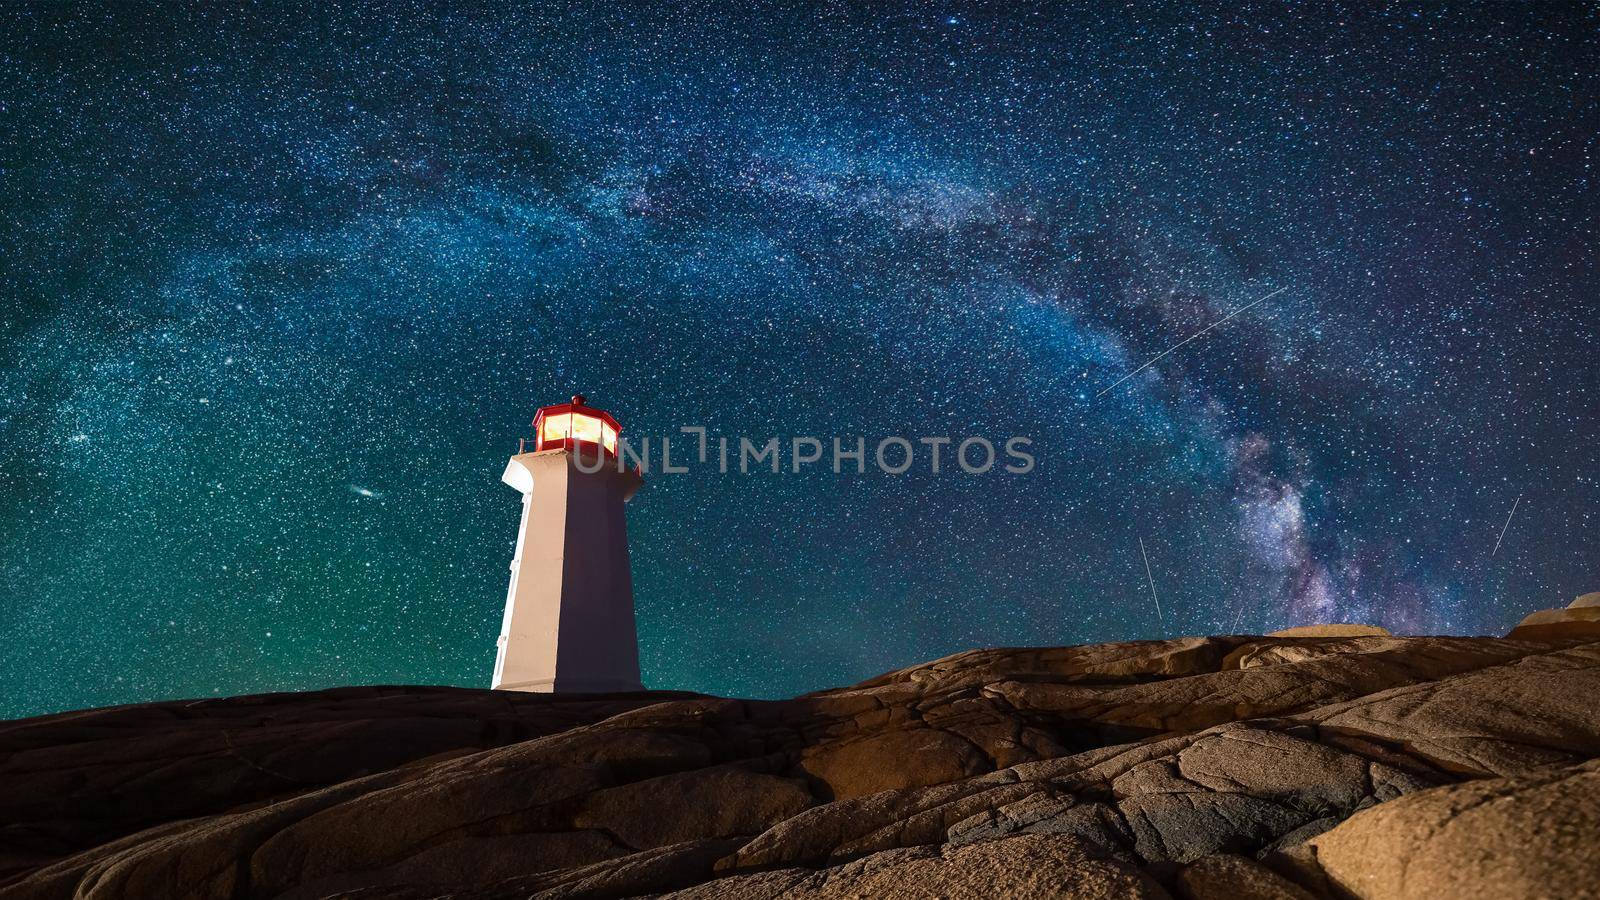 Lighthouse surrounded by rocks at night, lighthouse with lights on at night by isaiphoto